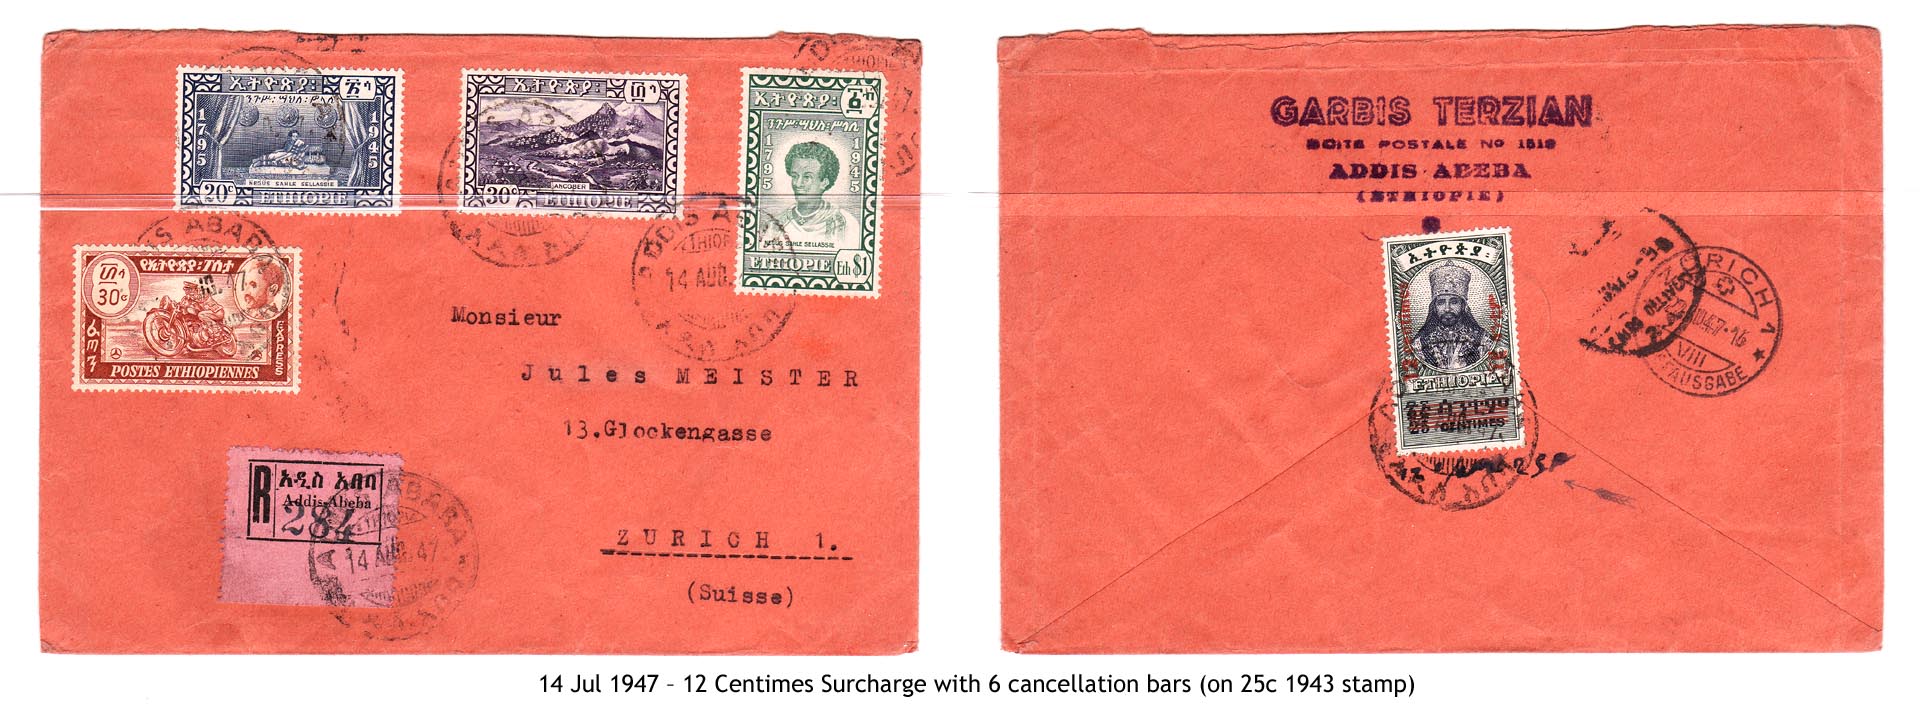 19470714 – 12 Centimes Surcharge with 6 cancellation bars (on 25c 1943 stamp)